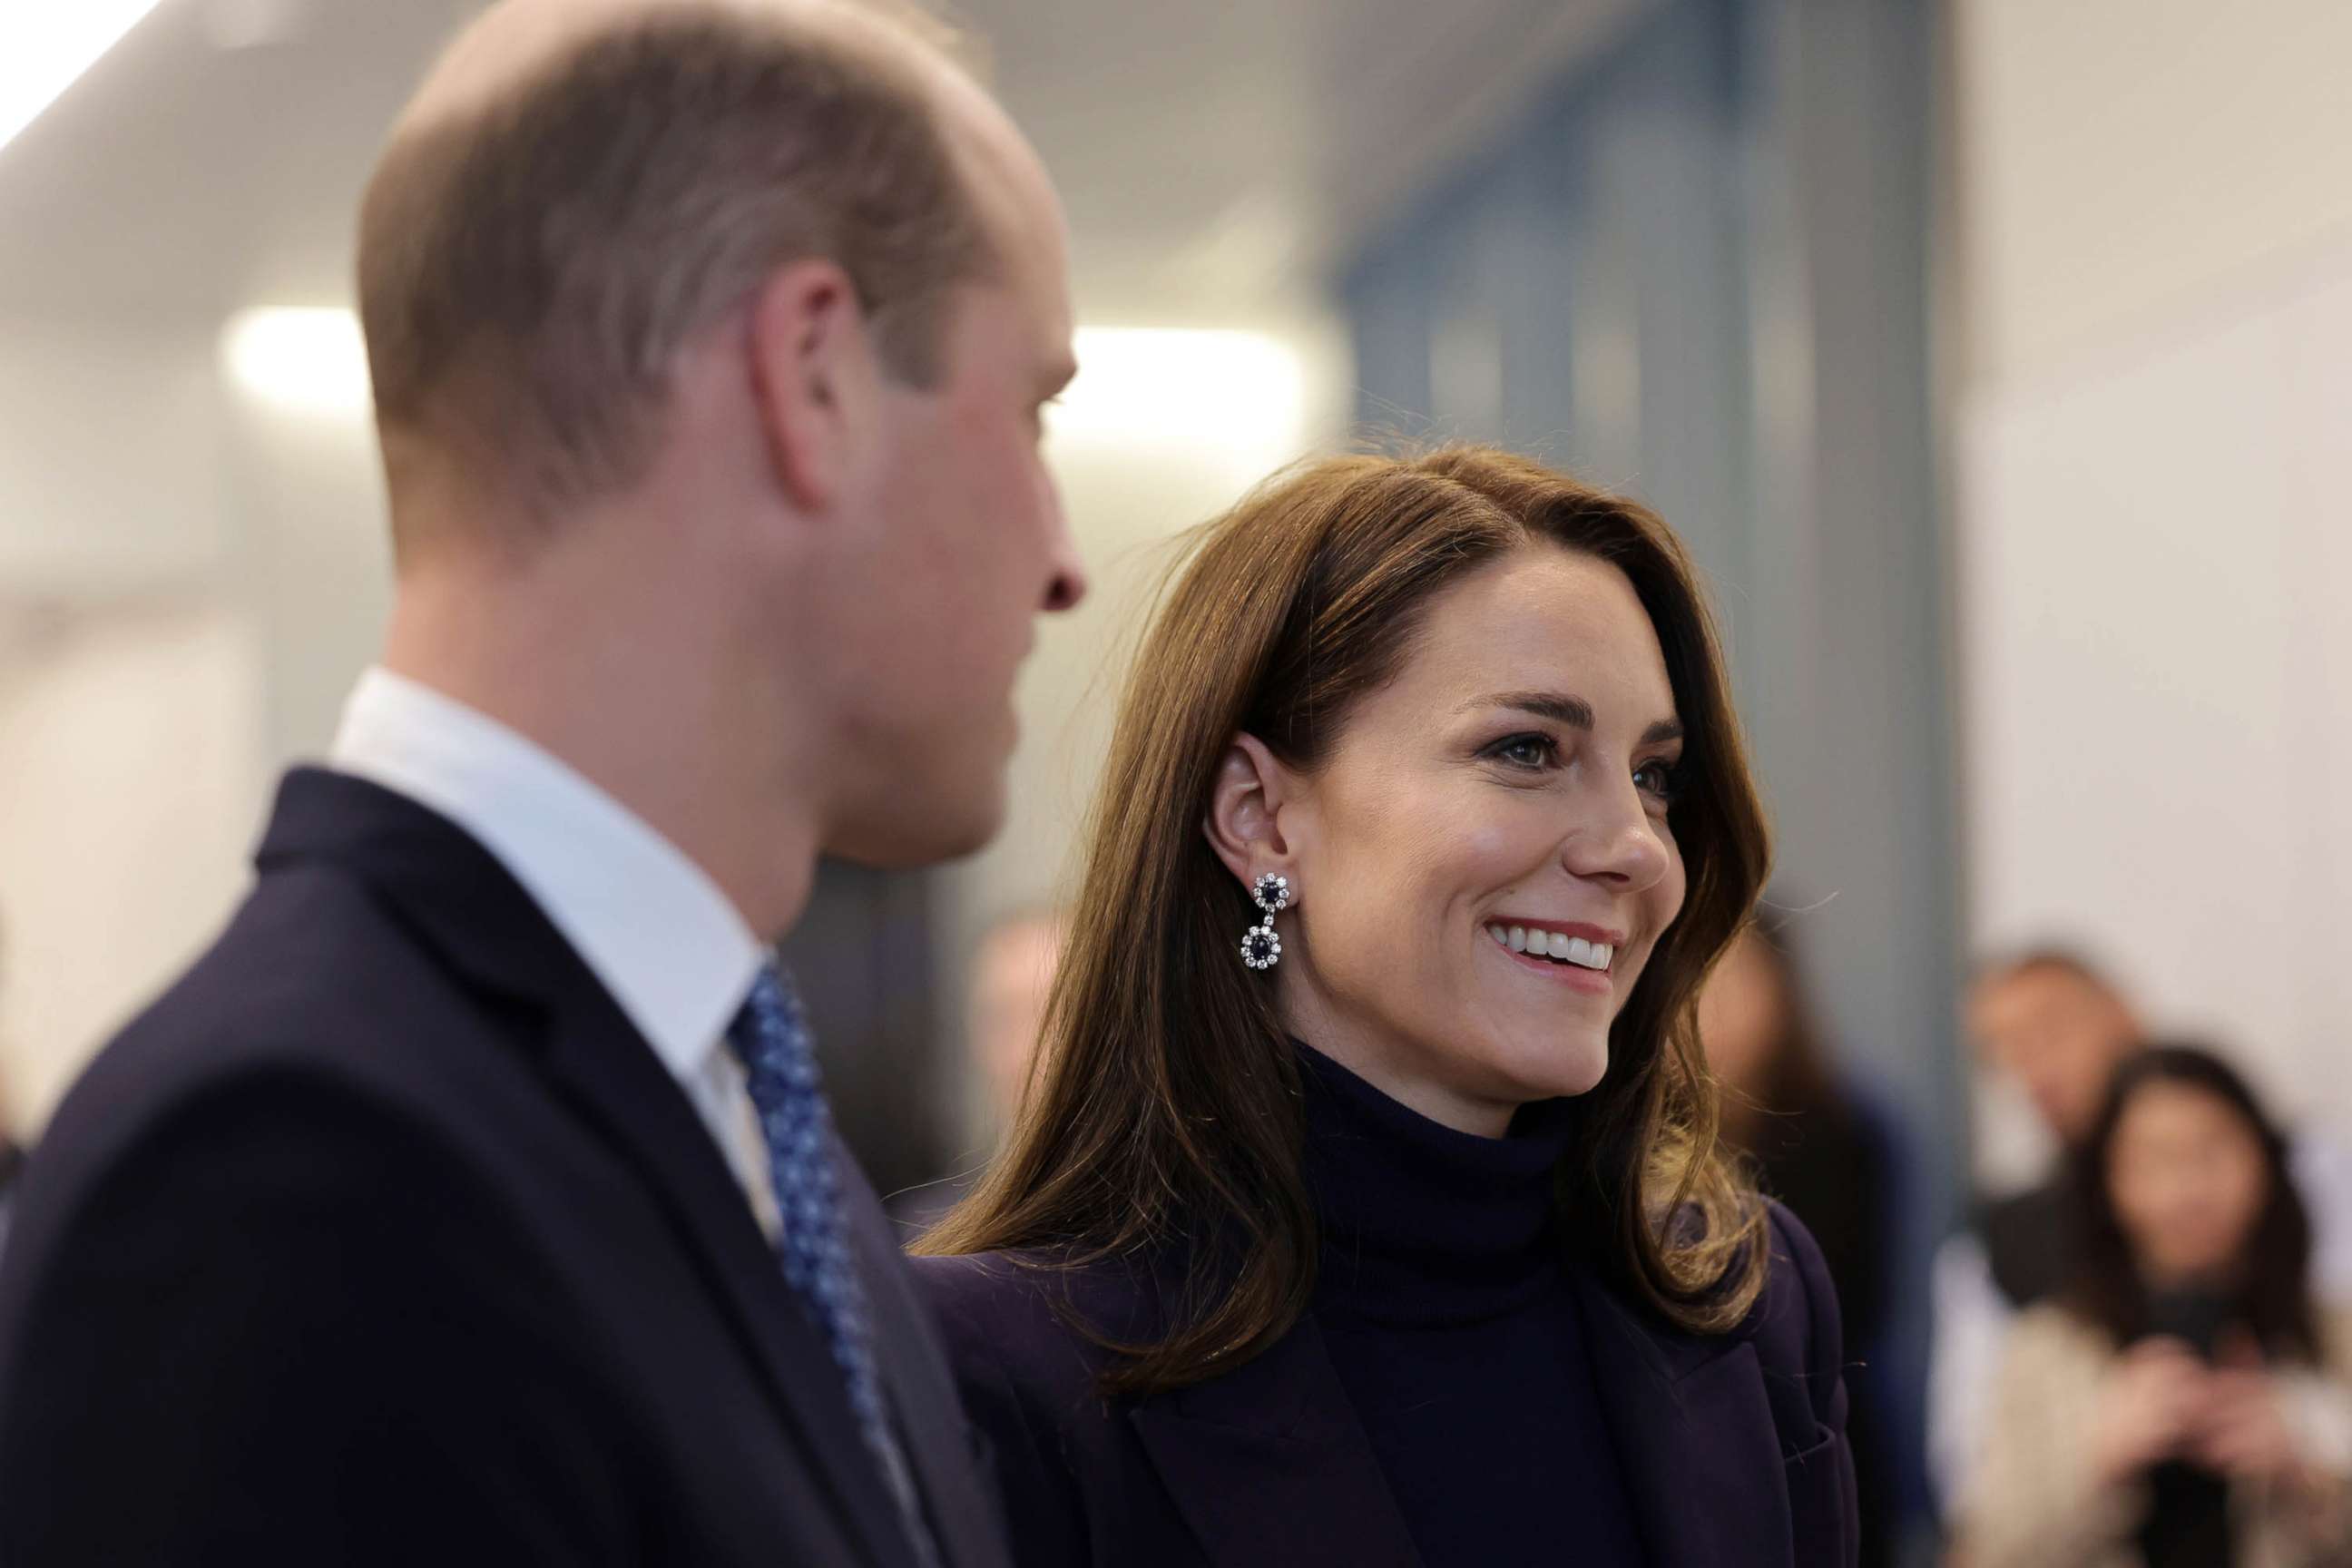 Kate Middleton and Prince William Kick Off Black History Month in Wales